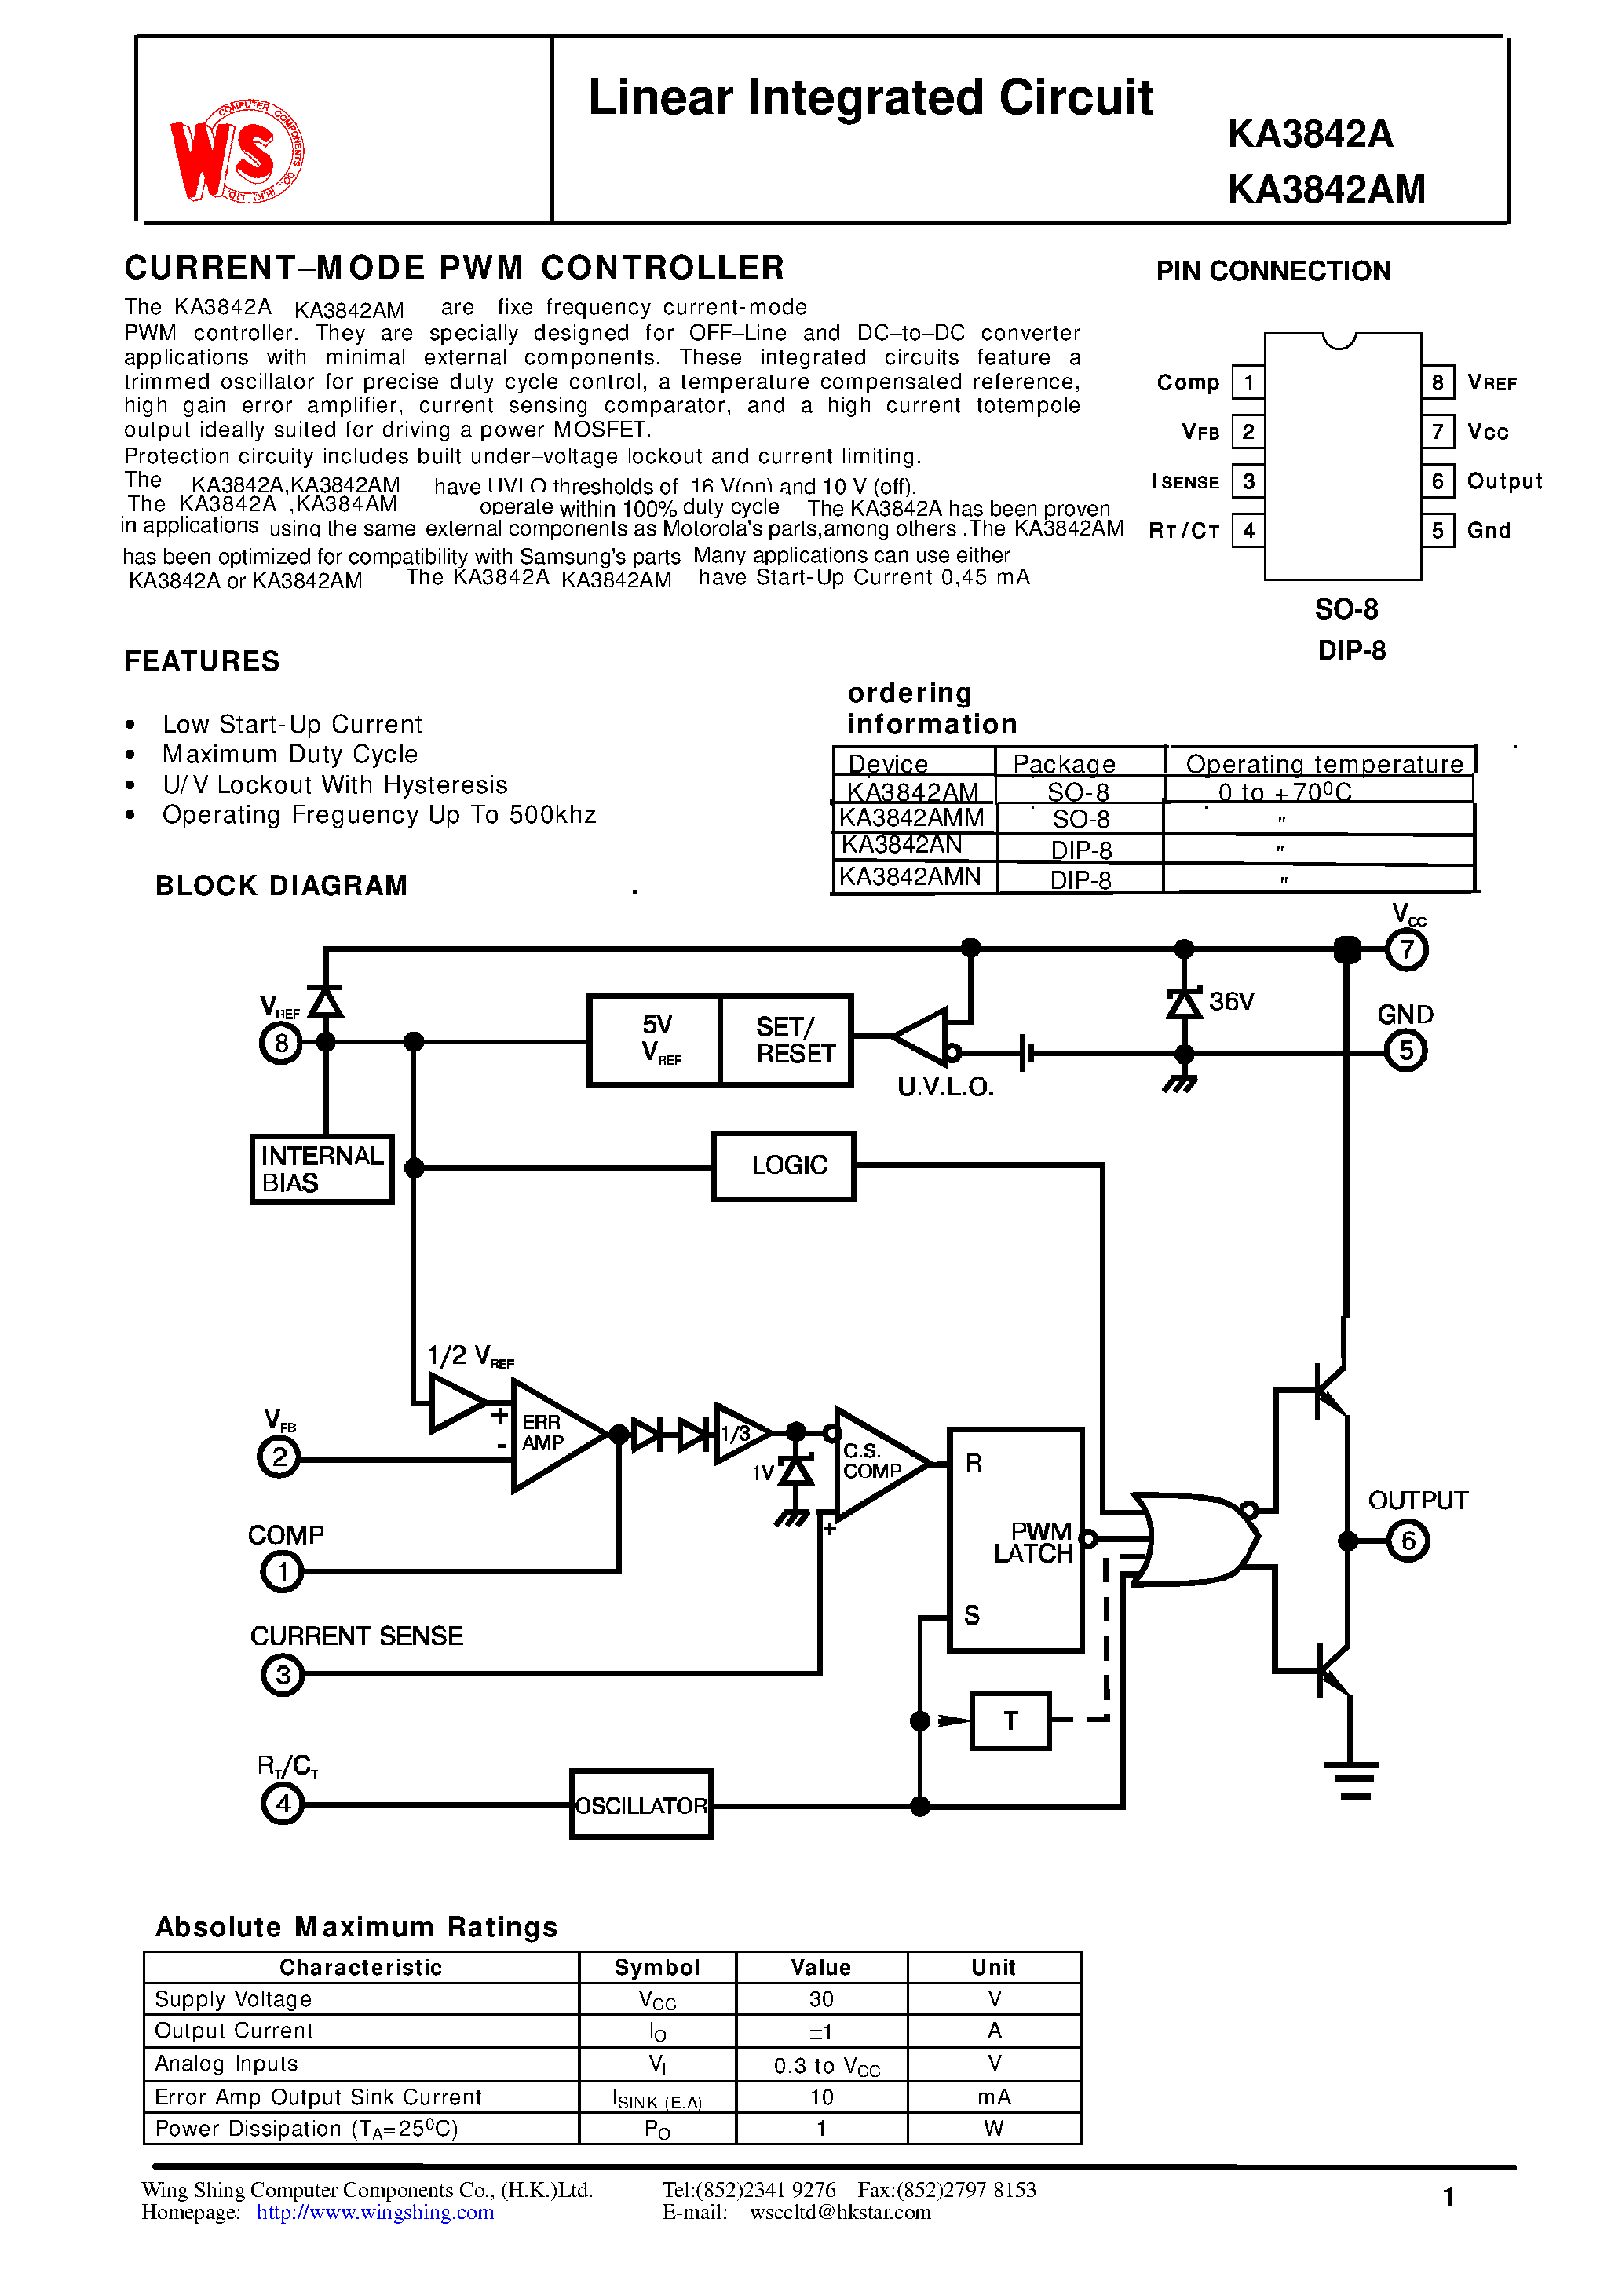 Datasheet KA3842A - Linear Integrated Circuit(CURRENT-MODE PWM CONTROLLER) page 1